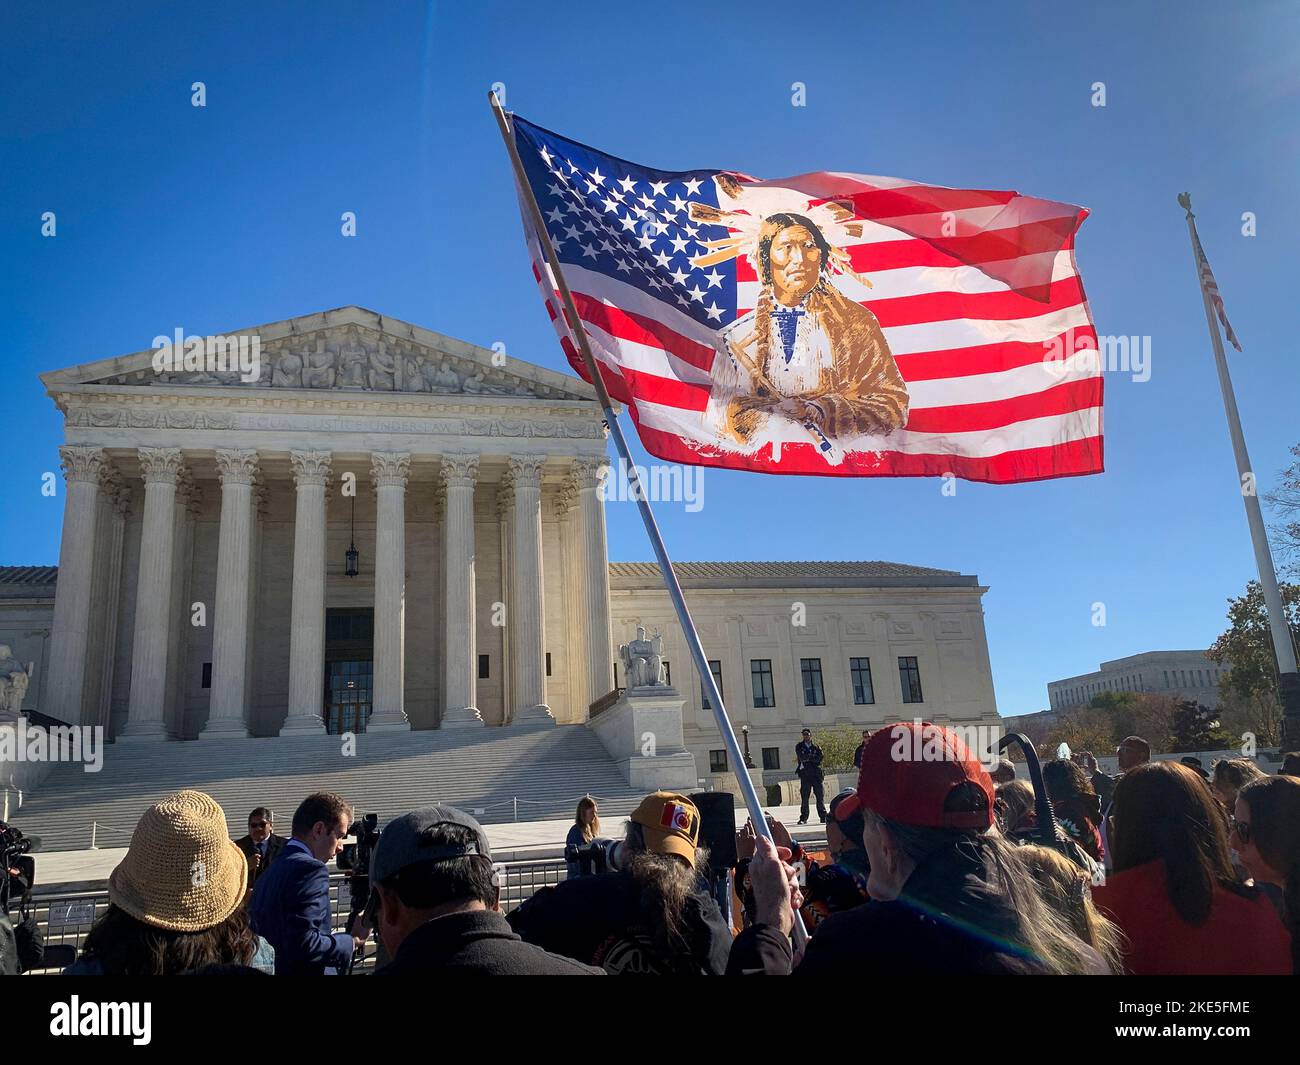 November 9, 2022, Washington, District of Columbia, USA: As the U.S. Supreme Court hears opening arguments on the constitutionality of the Indian Child Welfare Act (ICWA), a 1978 federal law which protects the interests of both Indian children and tribes, a U.S. flag with a Native image is held at a rally in front of the Supreme Court. (Credit Image: © Sue Dorfman/ZUMA Press Wire) Stock Photo